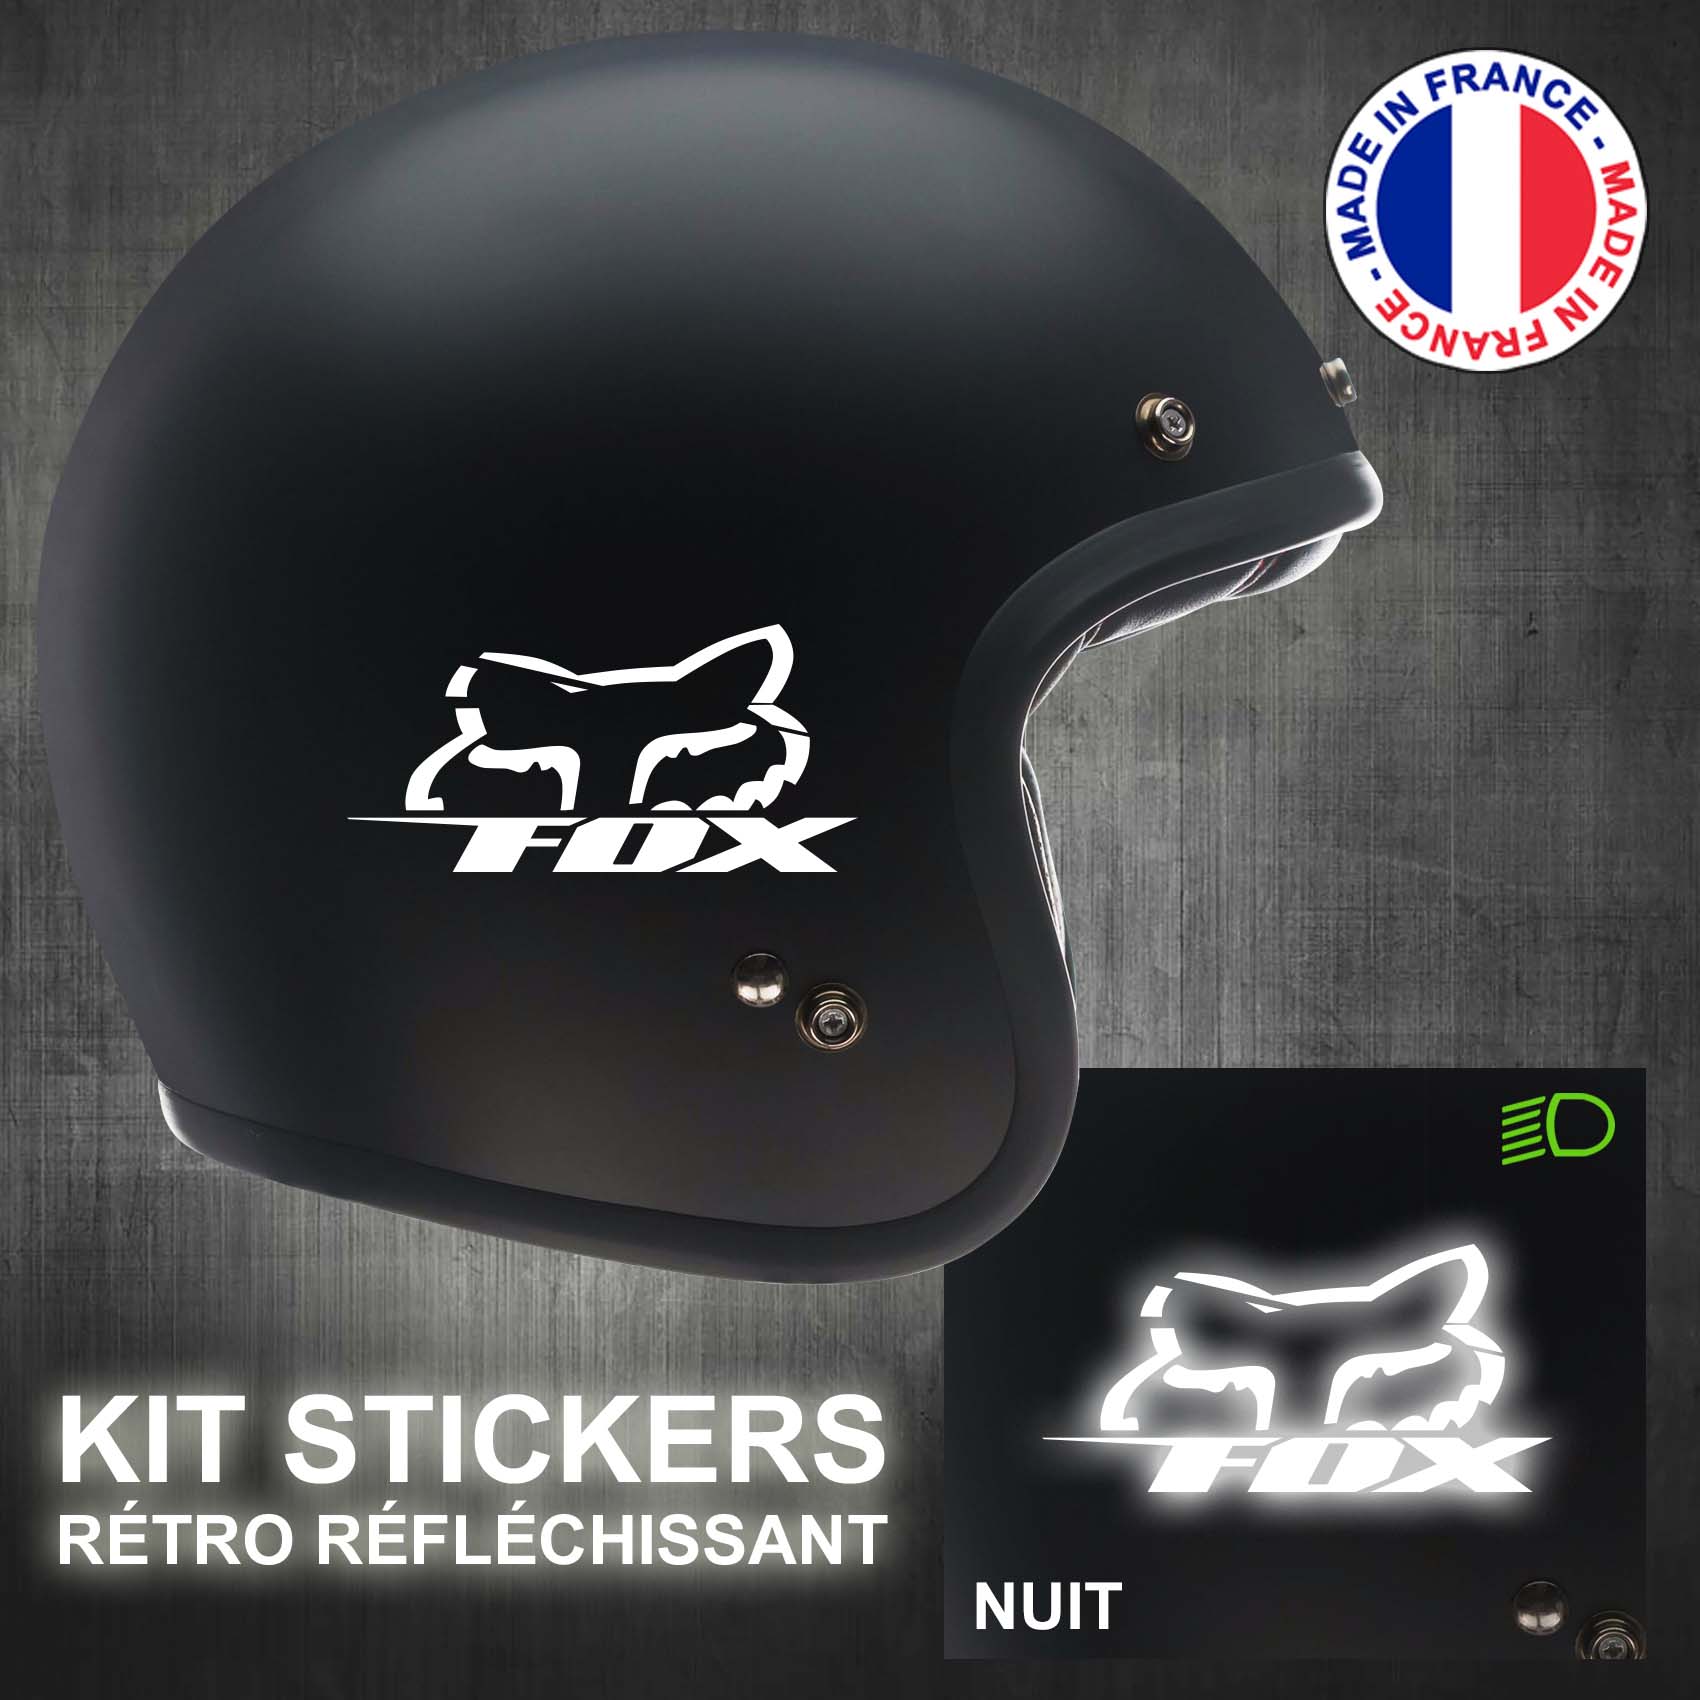 stickers-casque-moto-fox-ref1-retro-reflechissant-autocollant-noir-moto-velo-tuning-racing-route-sticker-casques-adhesif-scooter-nuit-securite-decals-personnalise-personnalisable-min